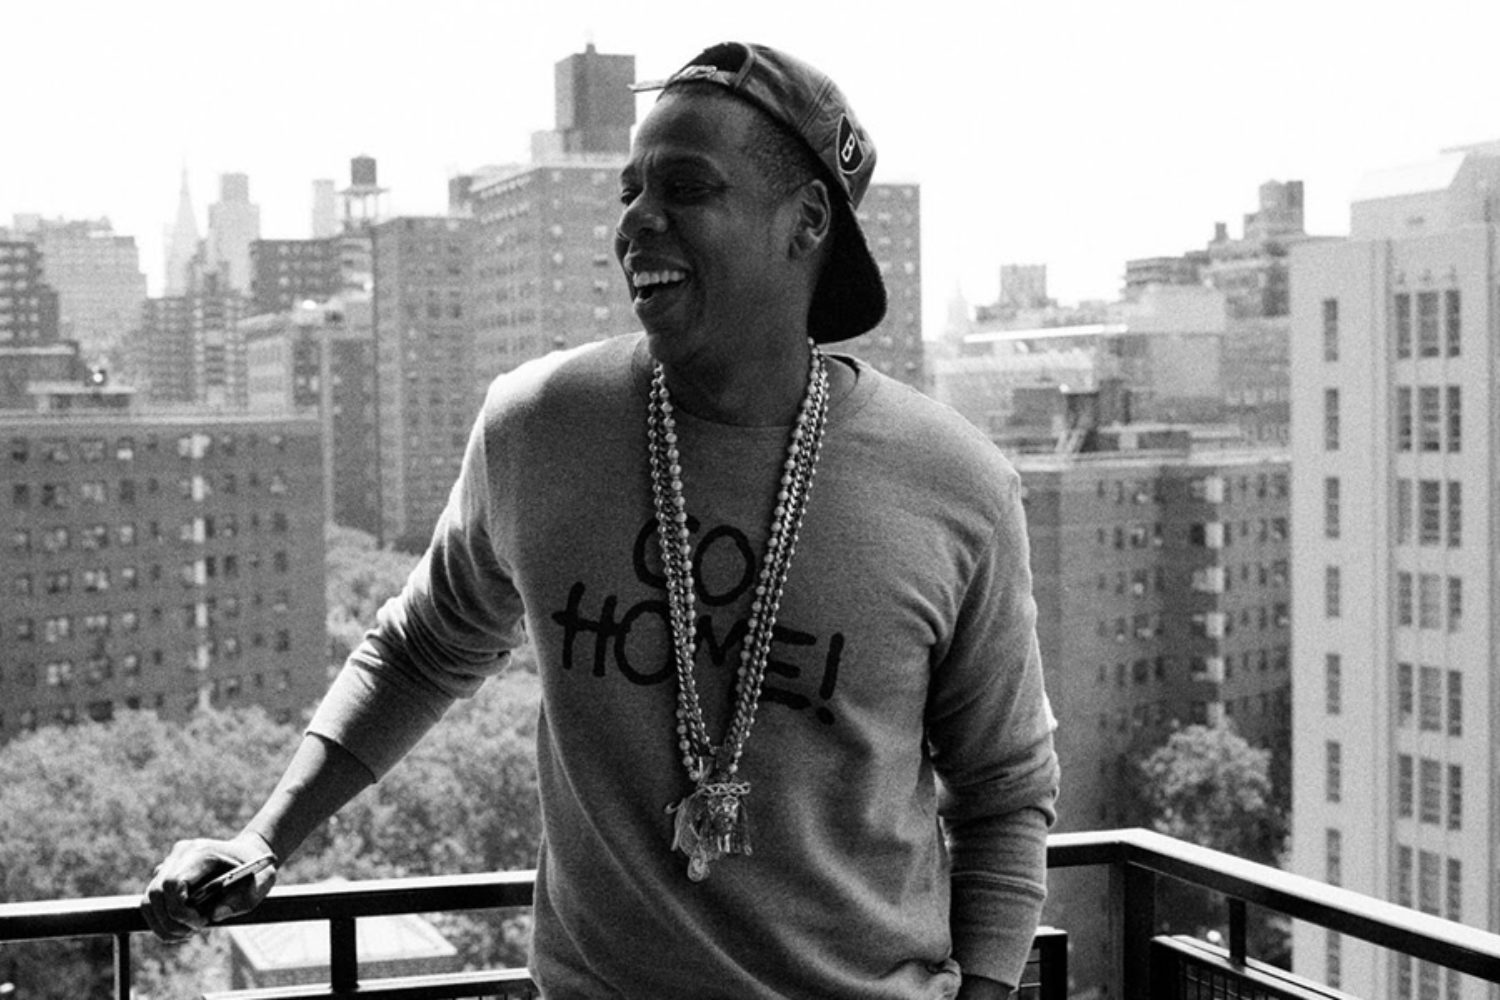 tidal jay z empire state of mind